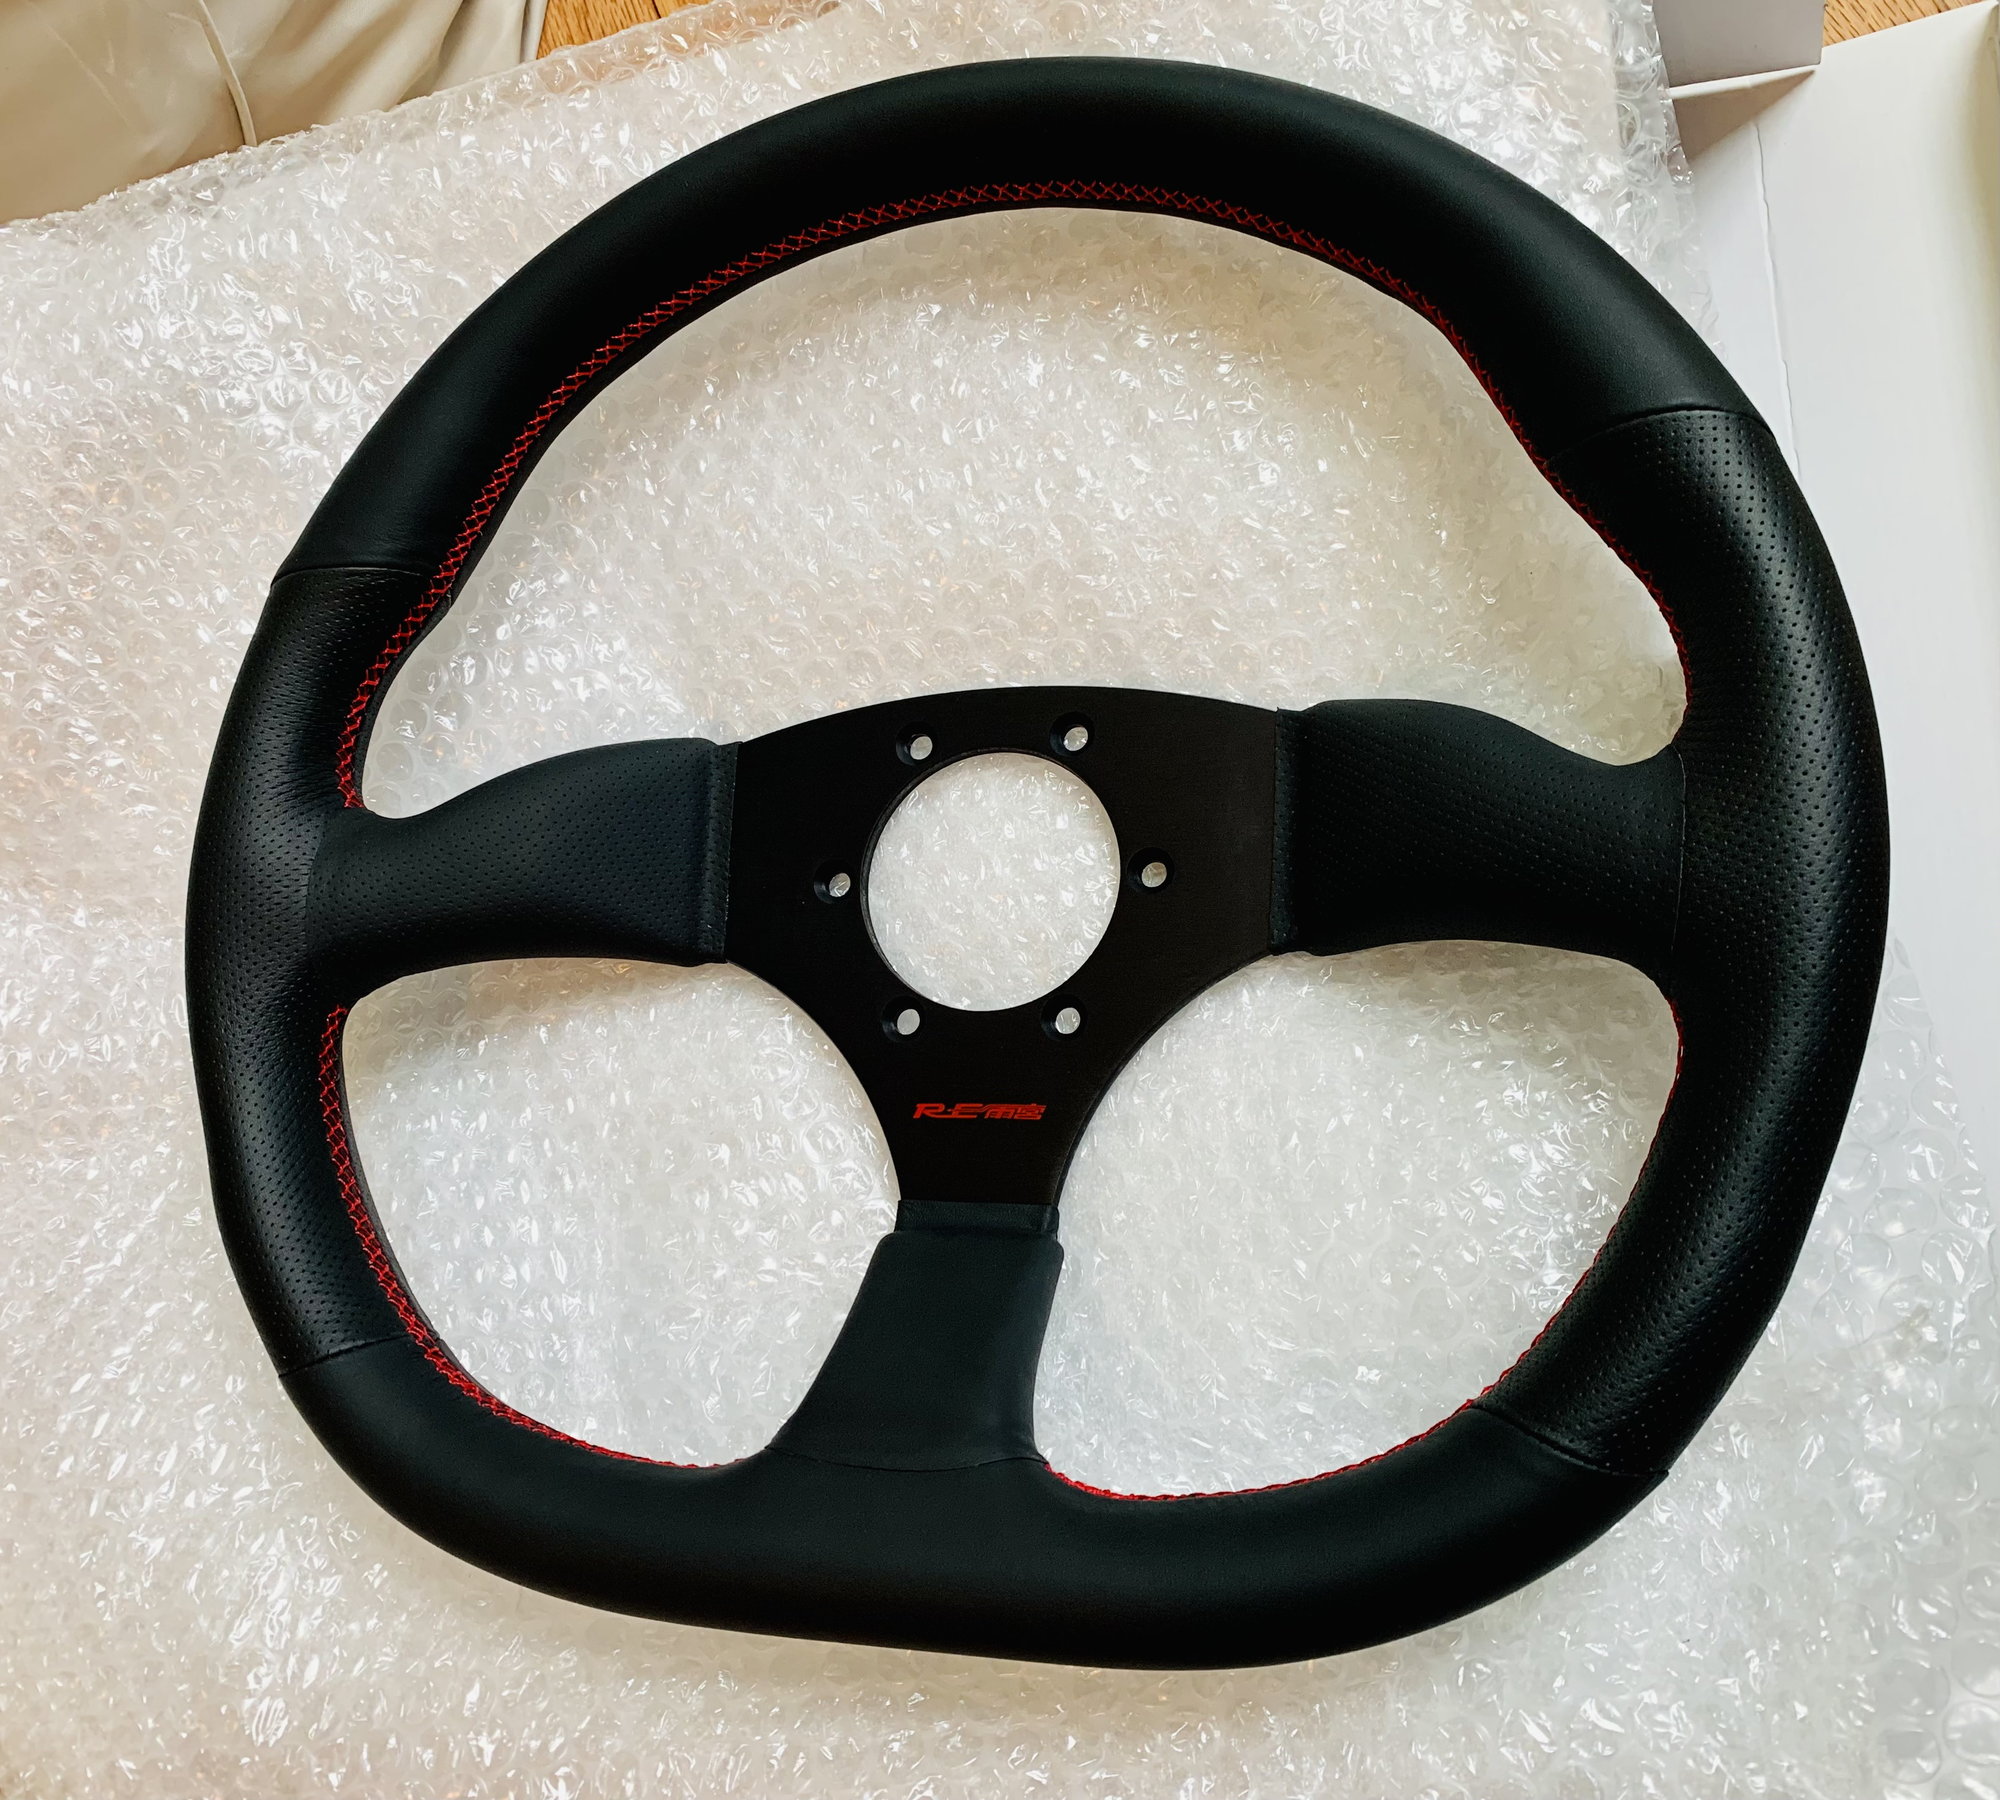 Interior/Upholstery - RE-Amemiya 345mm D-cut Steering Wheel, Black perforated leather with Red stitching - New - 0  All Models - Morristown, NJ 07960, United States